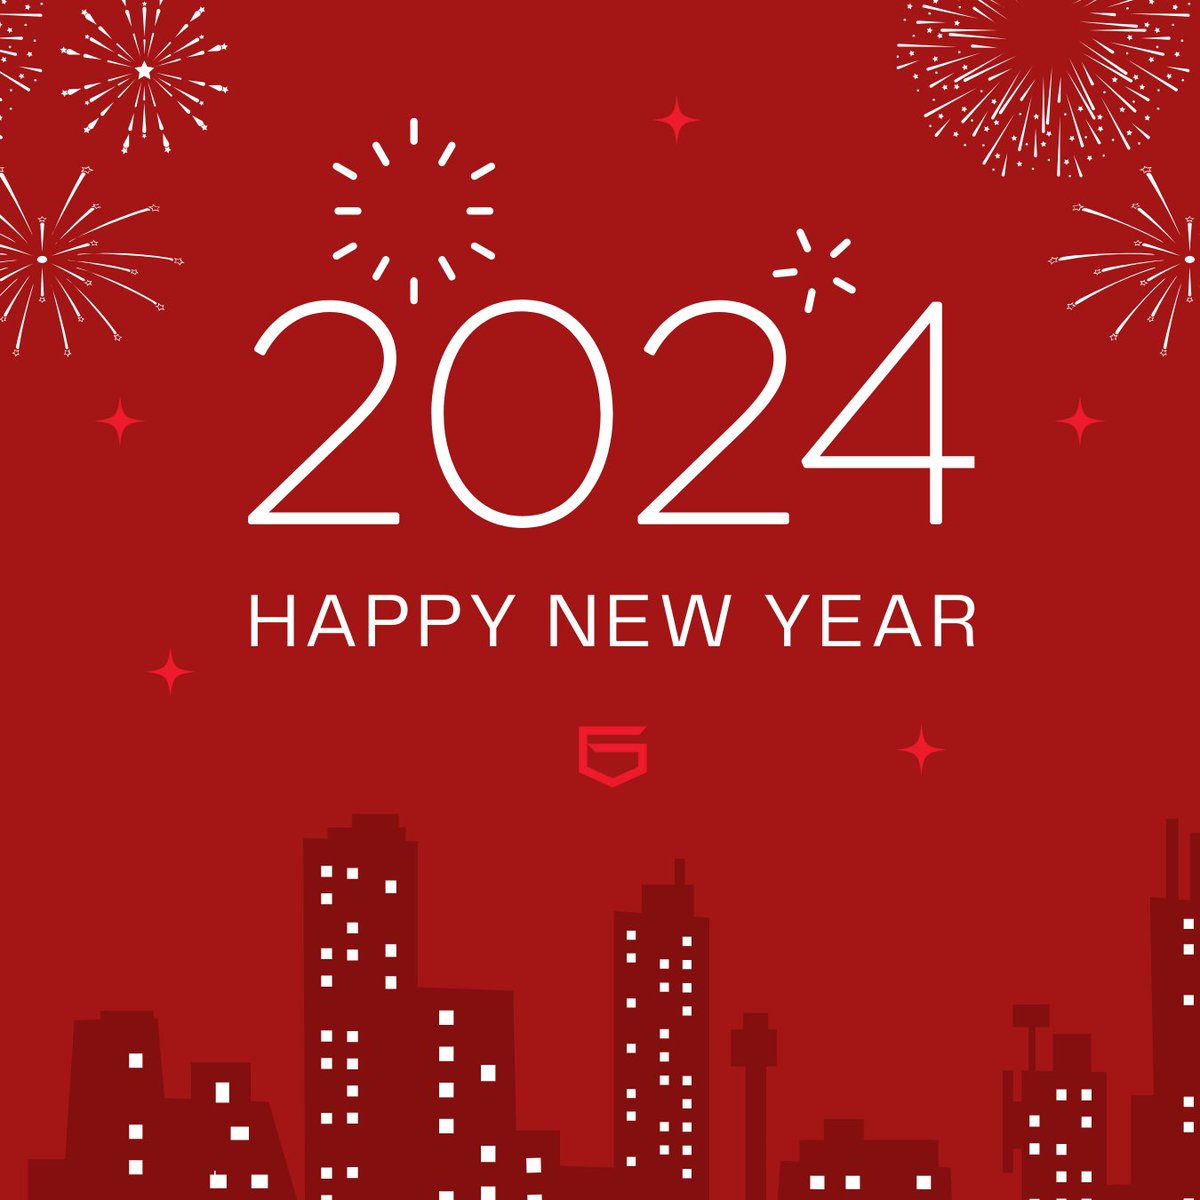 Cheers to a new year filled with teamwork, innovation, and shared success! #Secure2024 #EmailSecurity #MailGate 🎊🎇